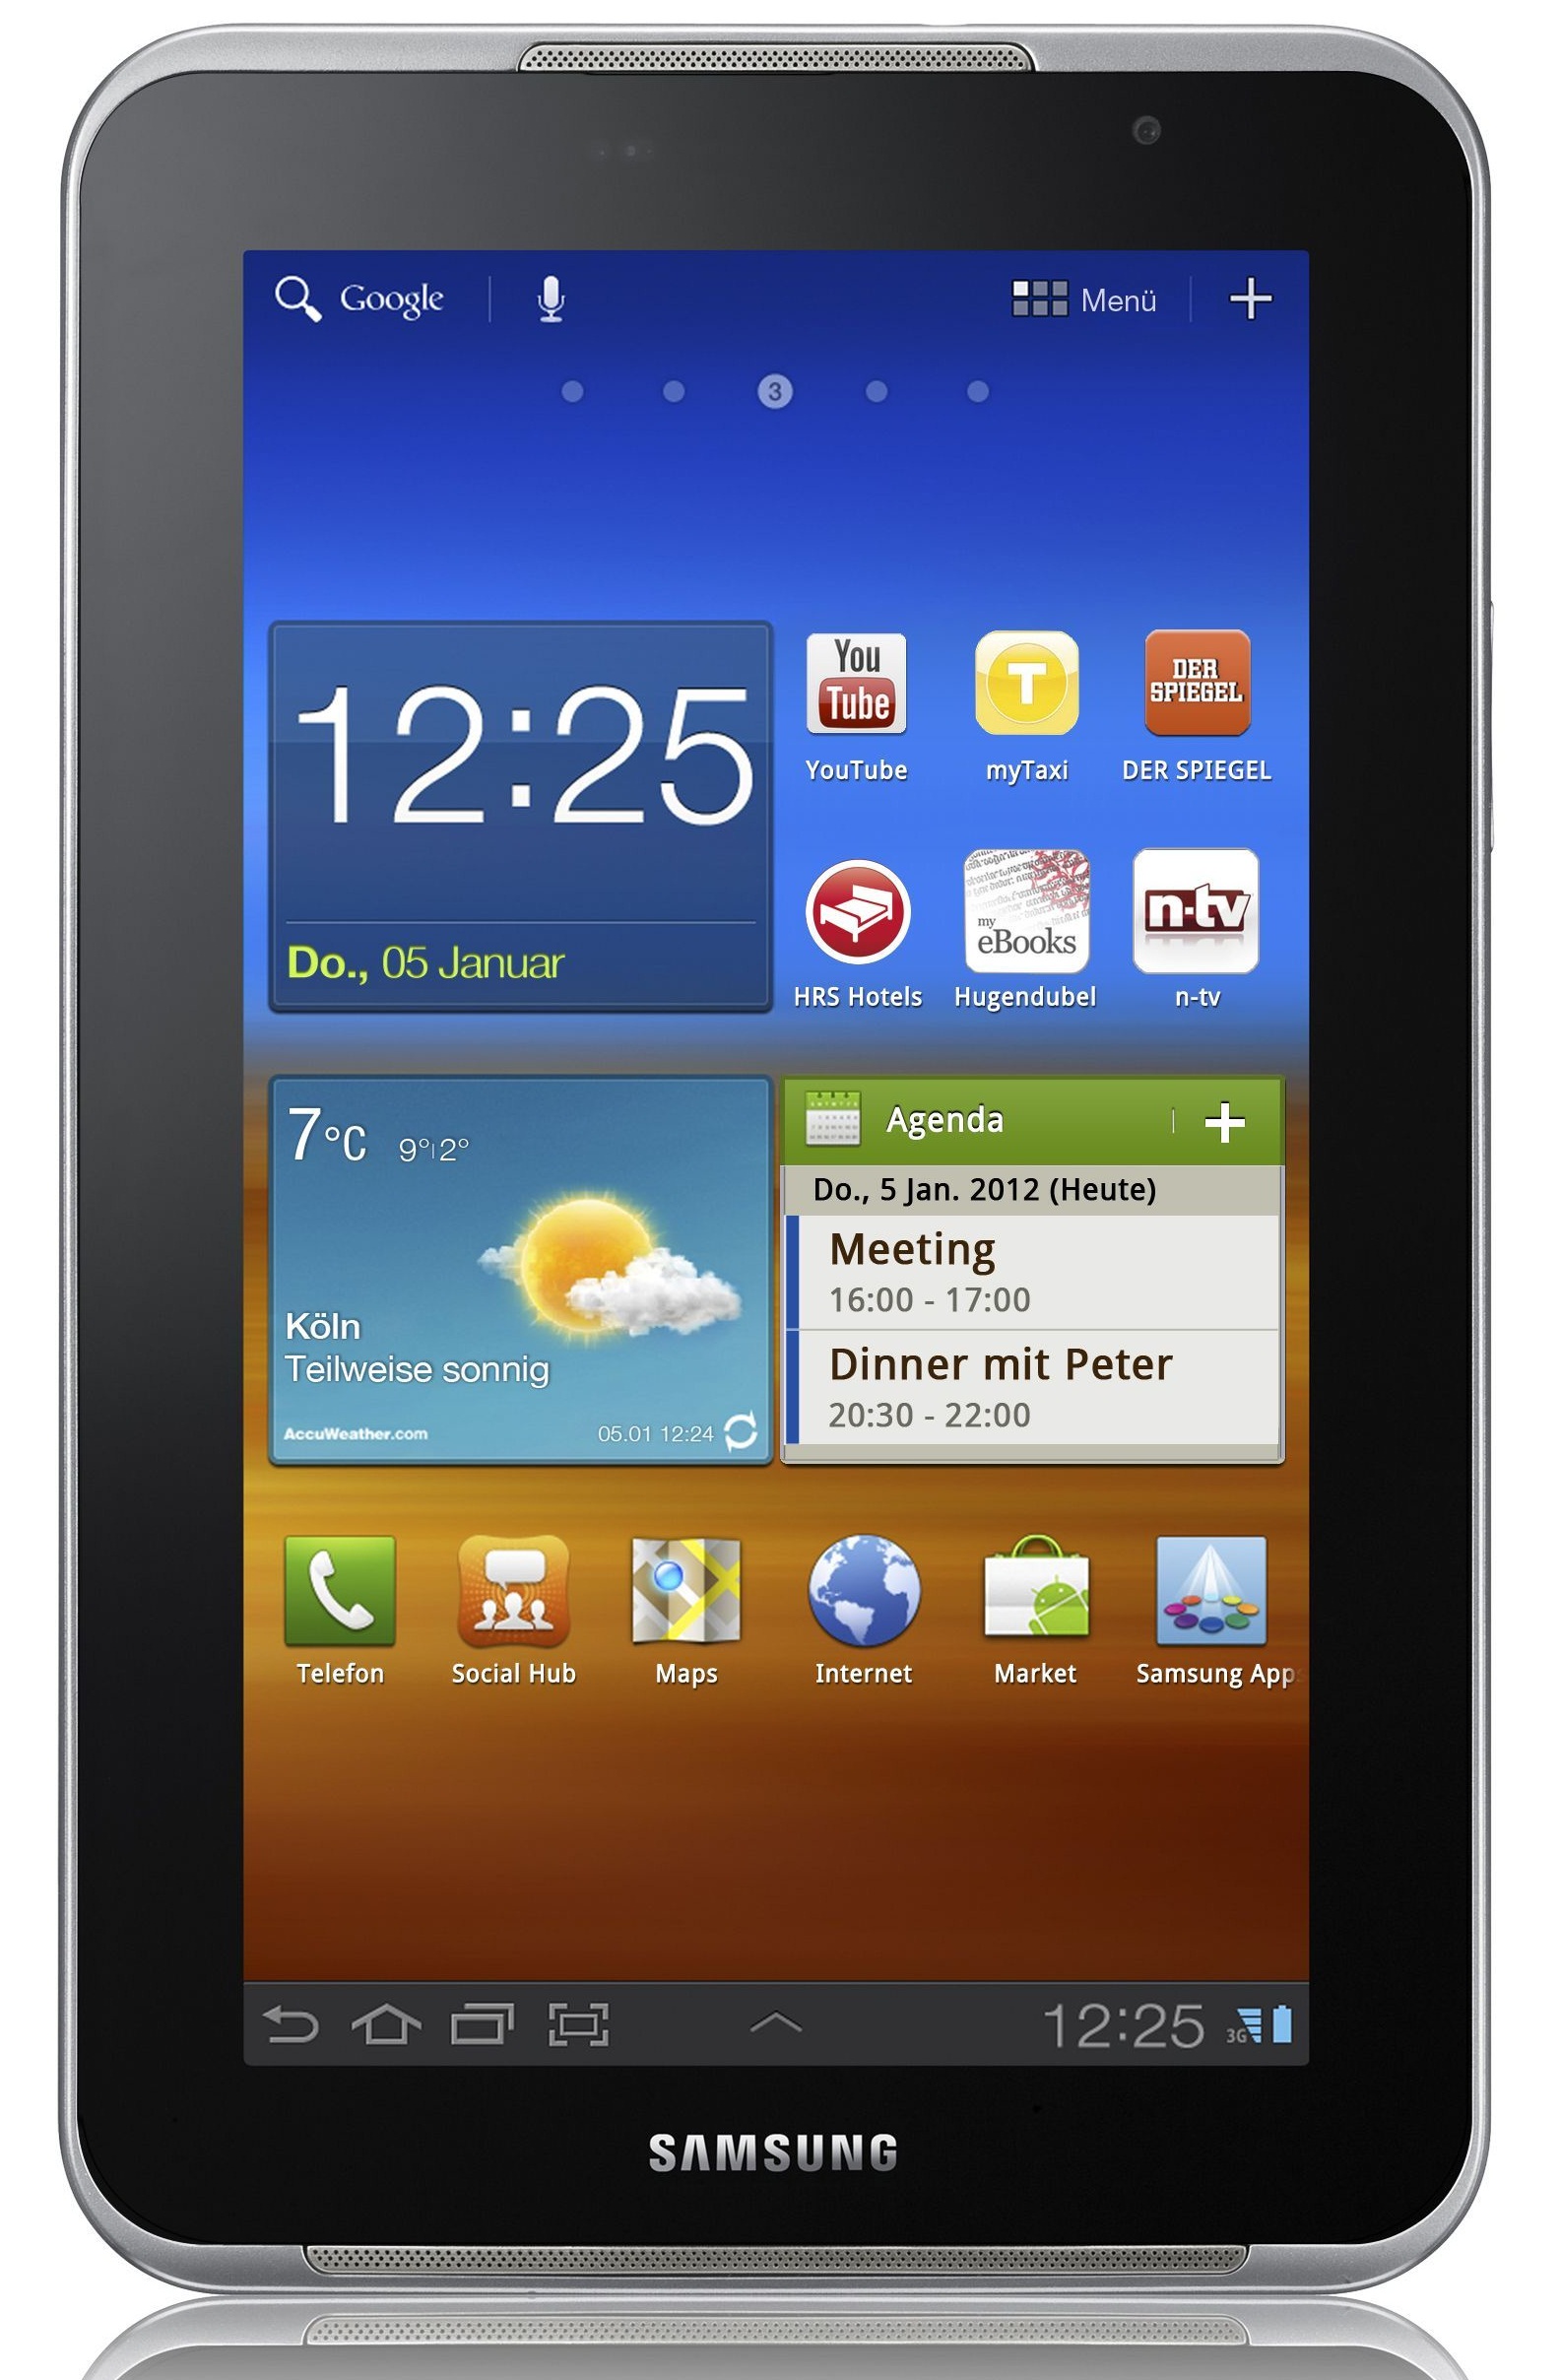 Samsung Galaxy Tab 7.0 Plus N Full Specifications And Price Details